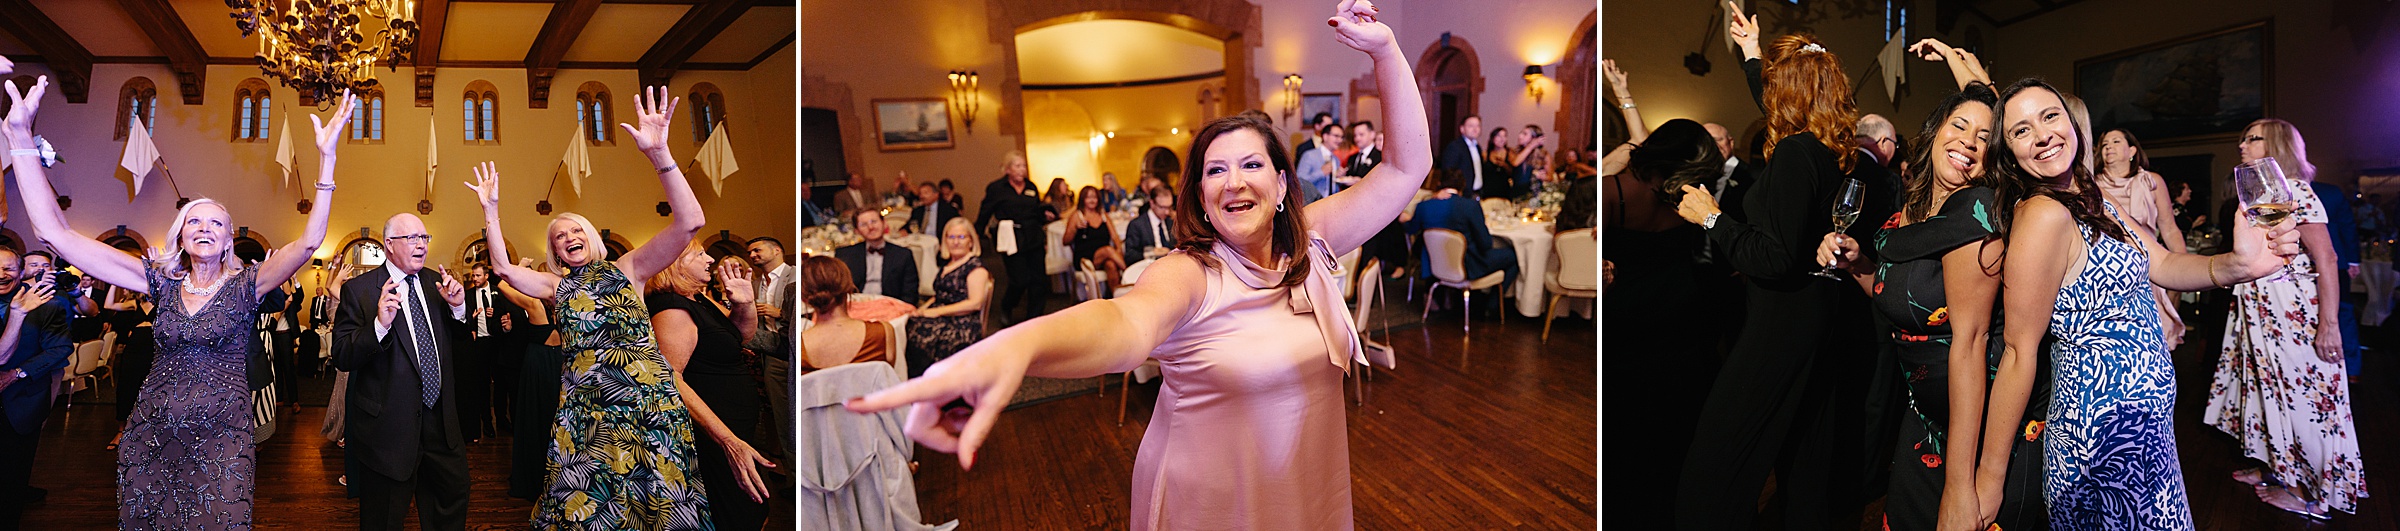 Guests dance during the reception at the Grosse Pointe Yacht Club by Detroit Wedding Photographer Michele Maloney